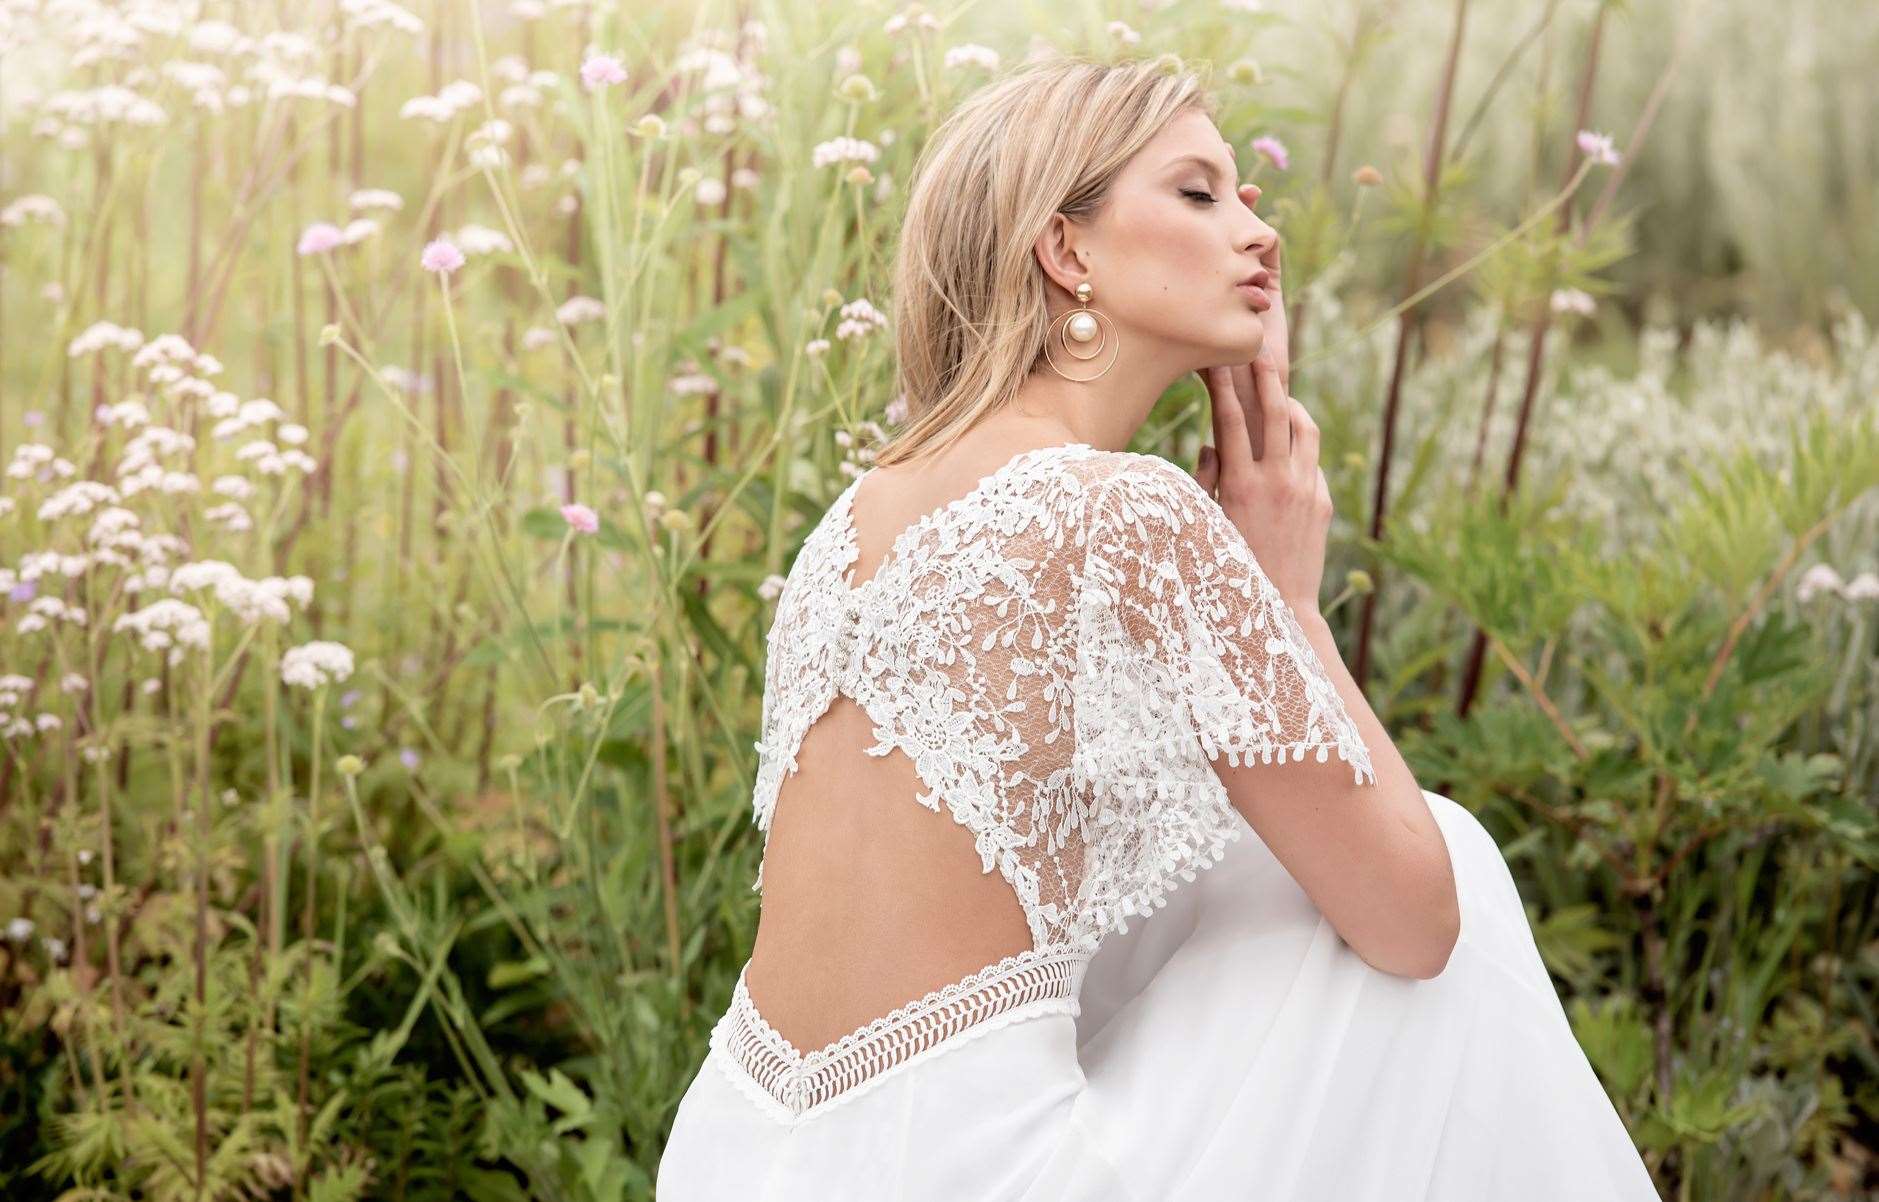 Check out some of the latest bridal gowns, like this from Ellis Bridals